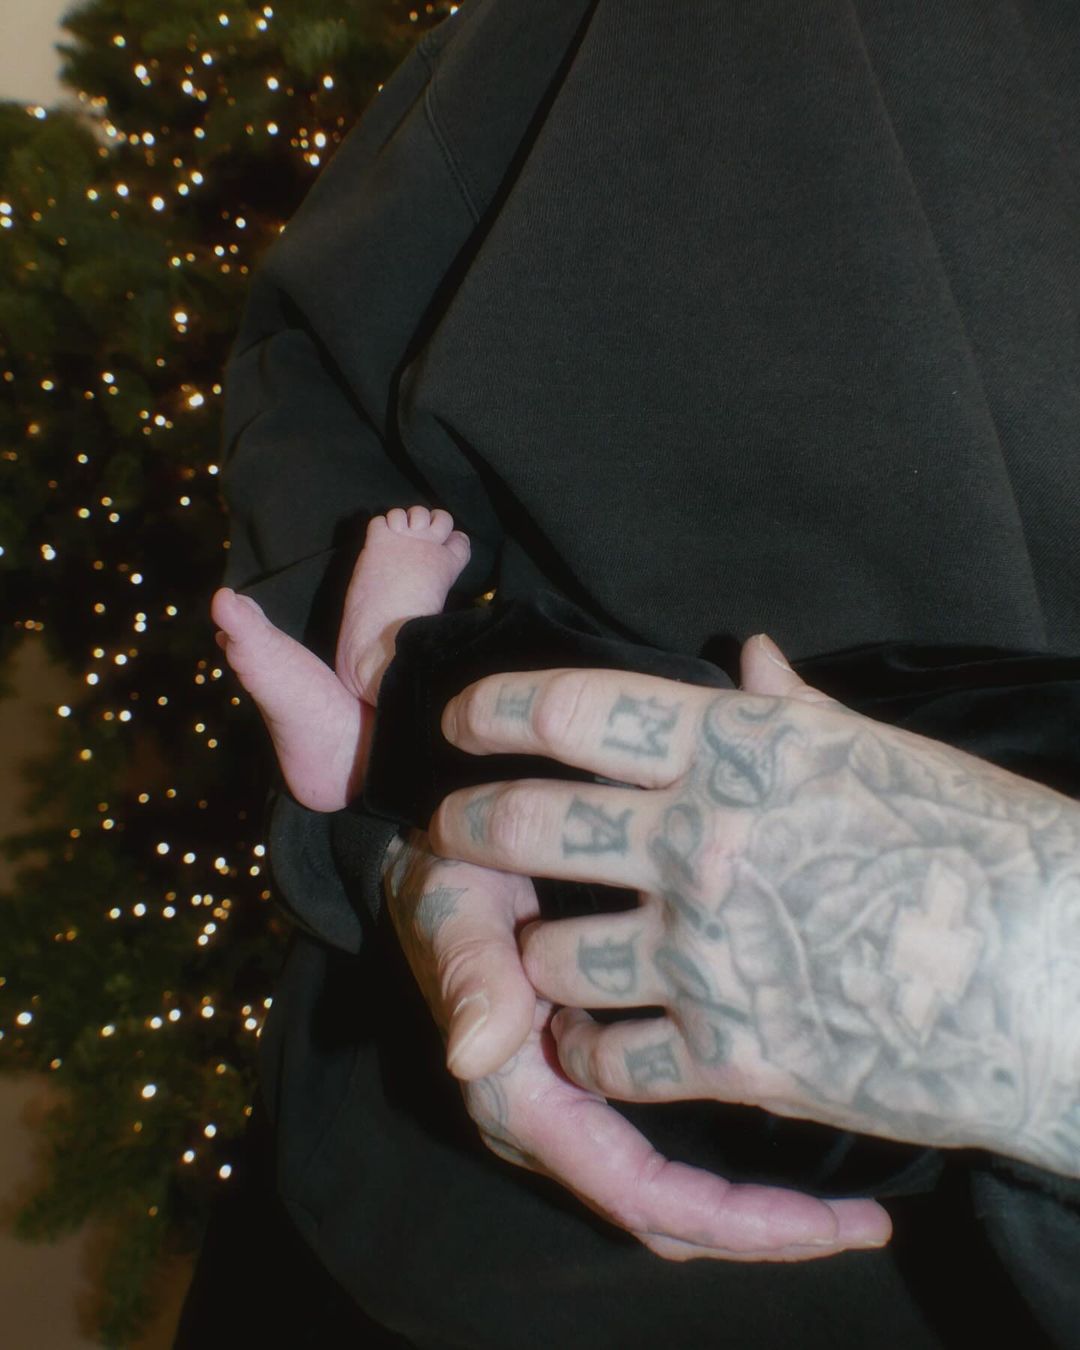 In another picture, Travis flaunted his son's adorable and tiny feet